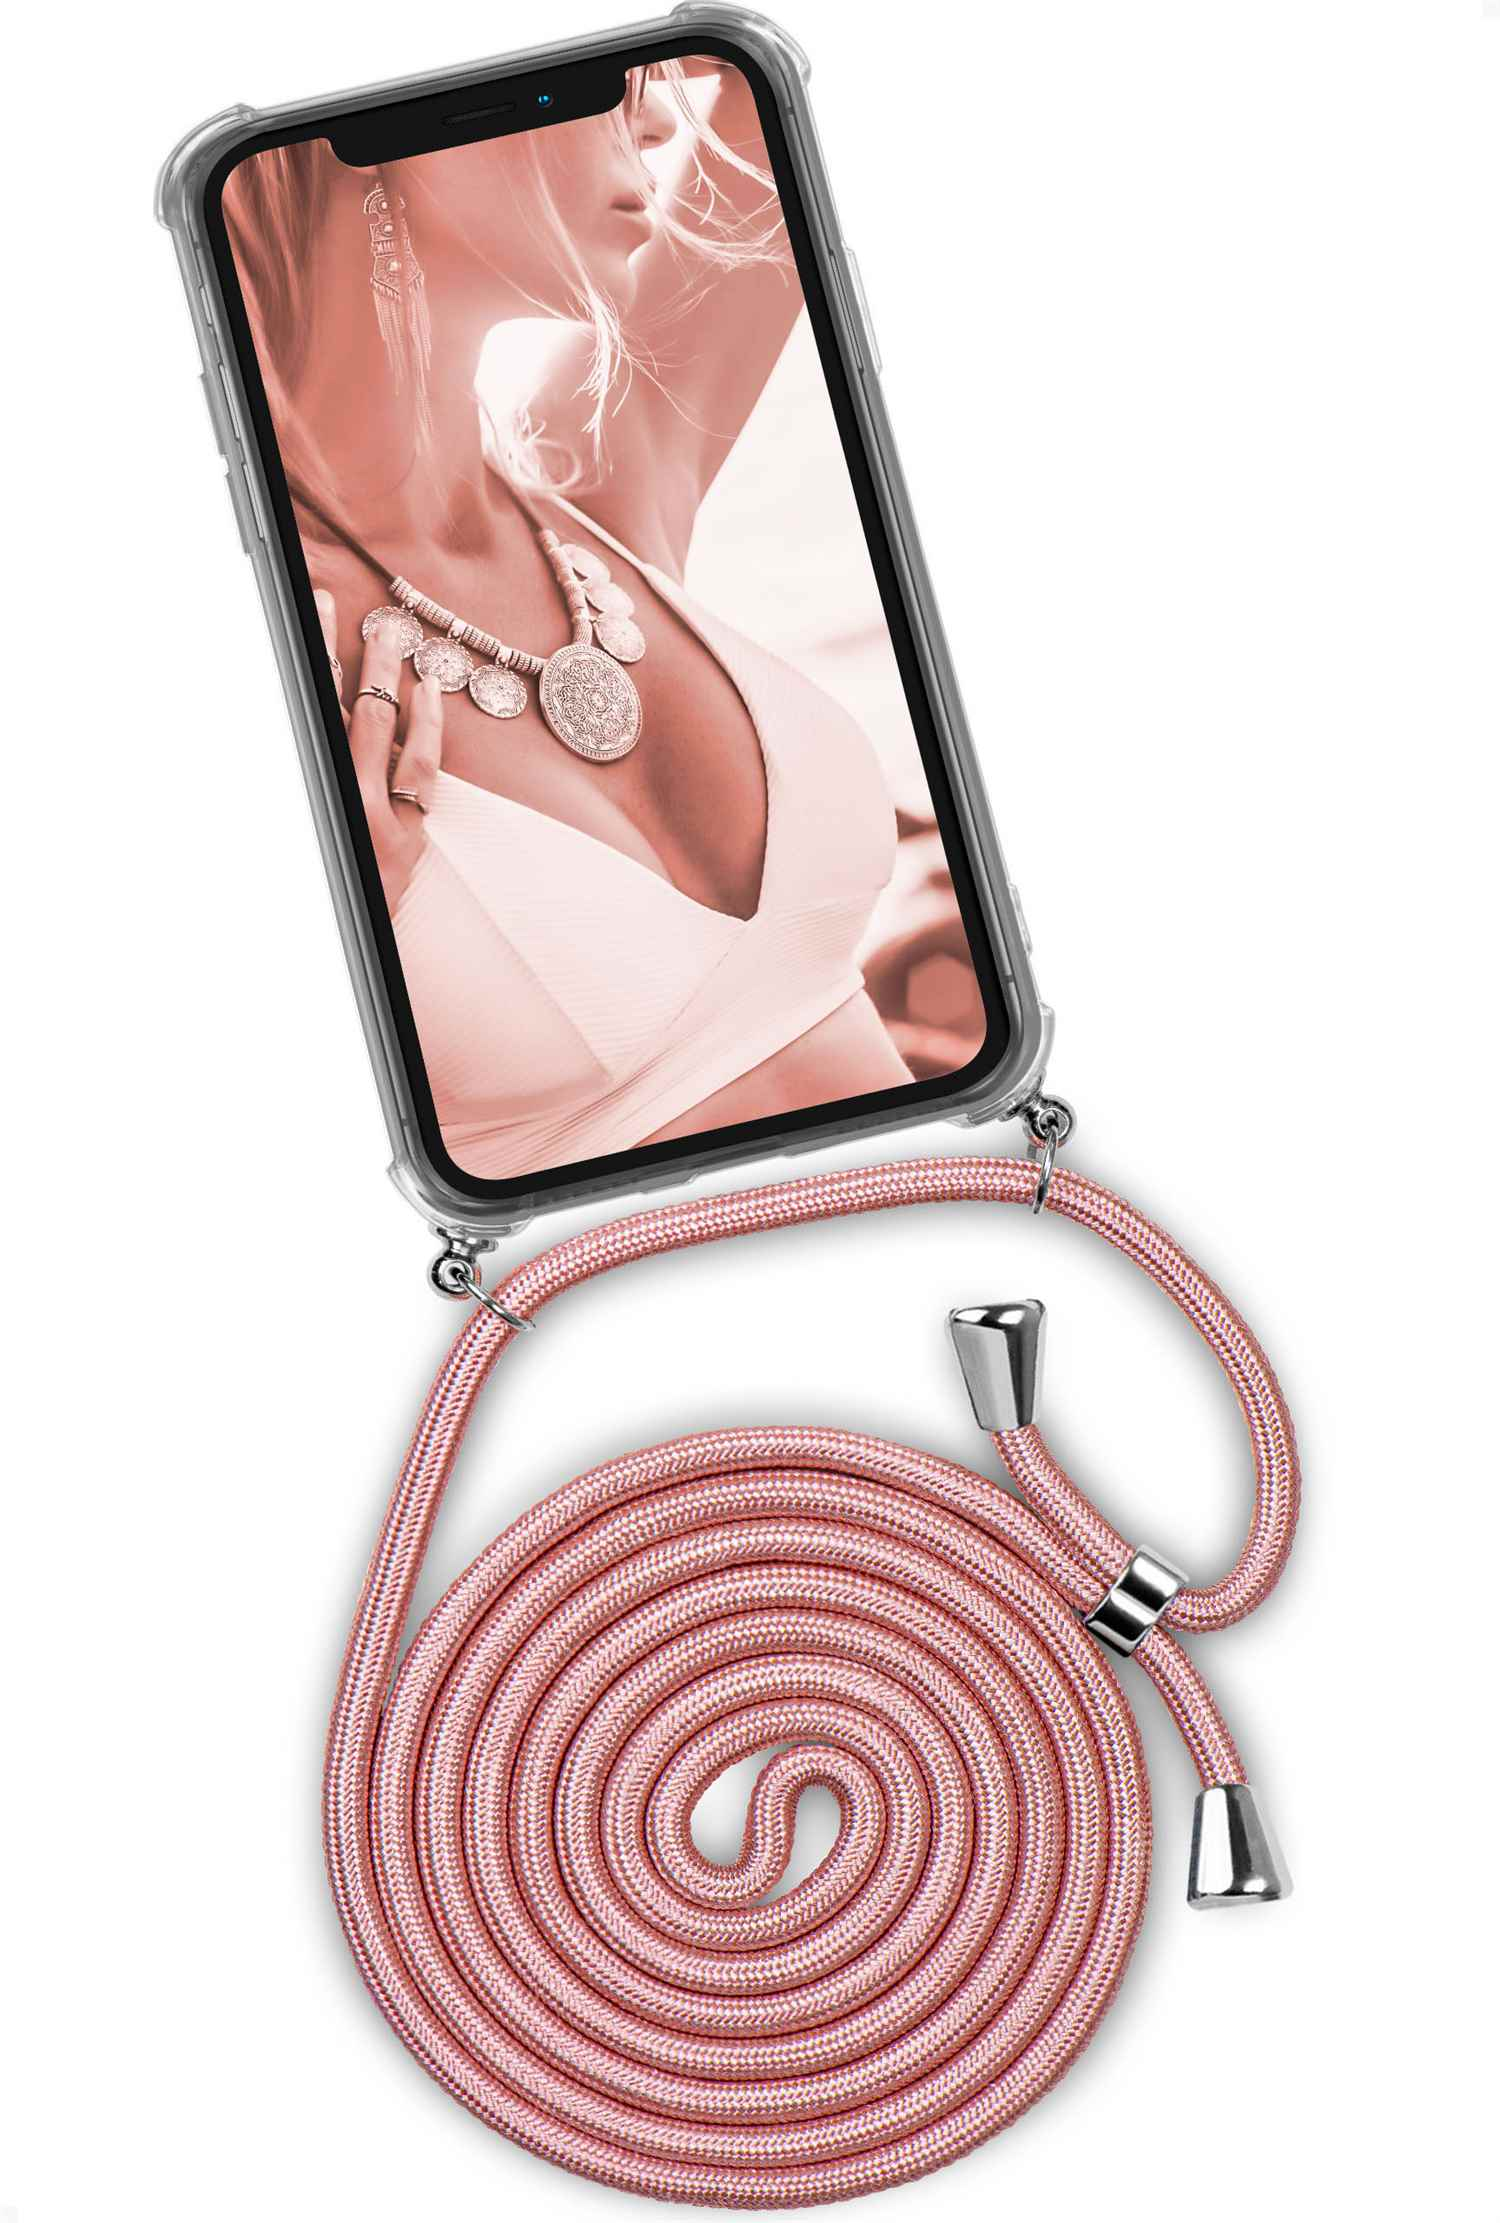 ONEFLOW Twist Case, Max, Pro Apple, iPhone Blush Backcover, Shiny 12 (Silber)